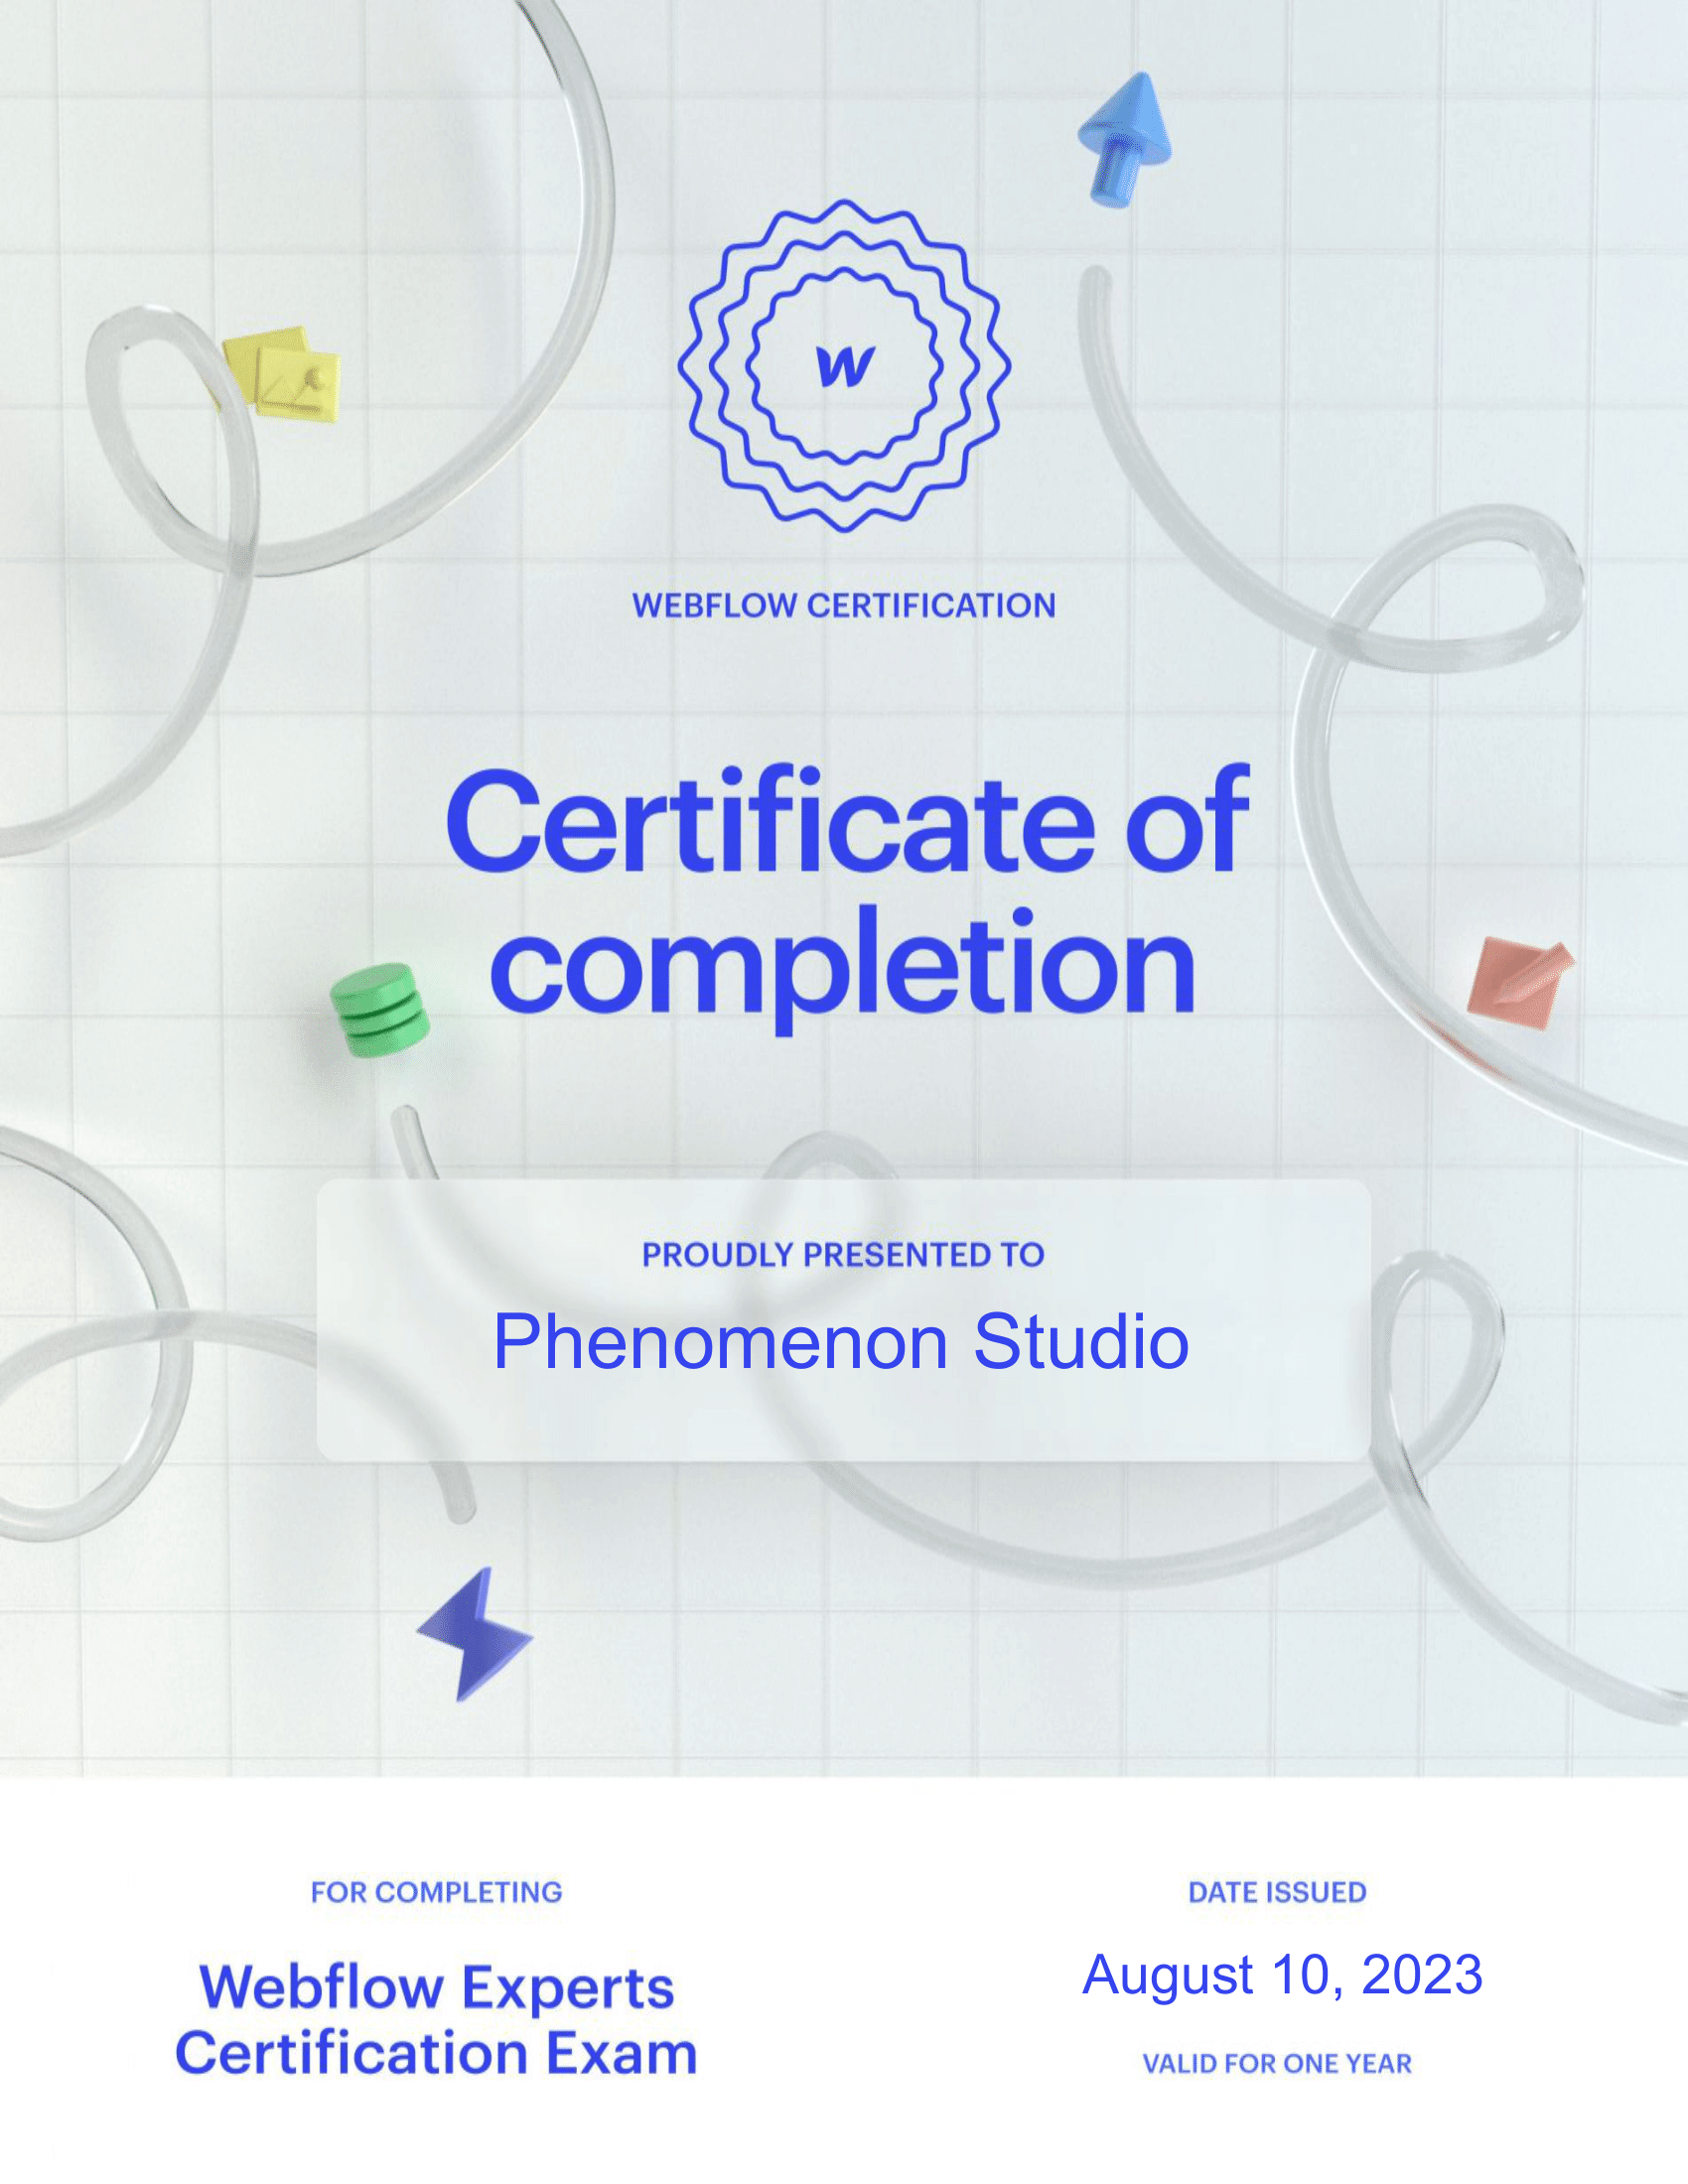 Phenomenon has received newly released Webflow certificates - Photo 4